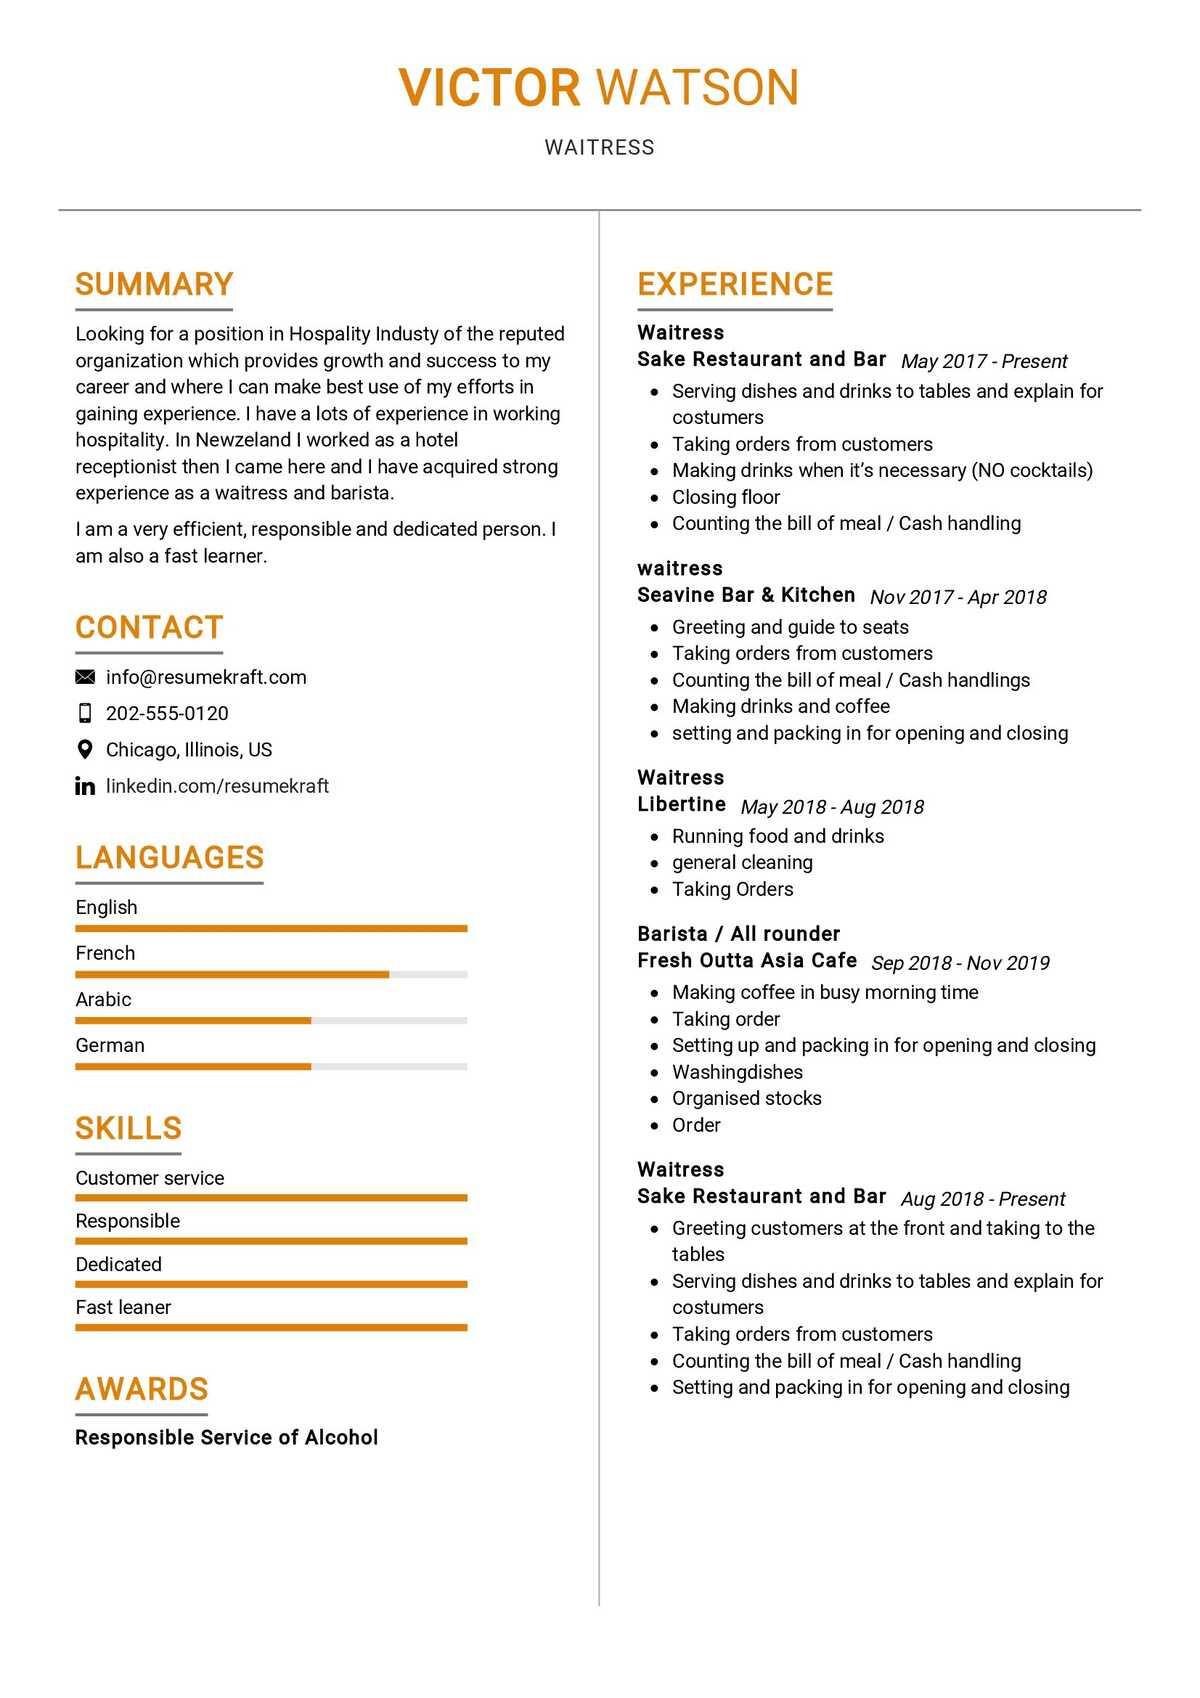 Sample Resume for Waitress with Experience Waitress Resume Sample 2021 Writing Guide & Tips- Resumekraft